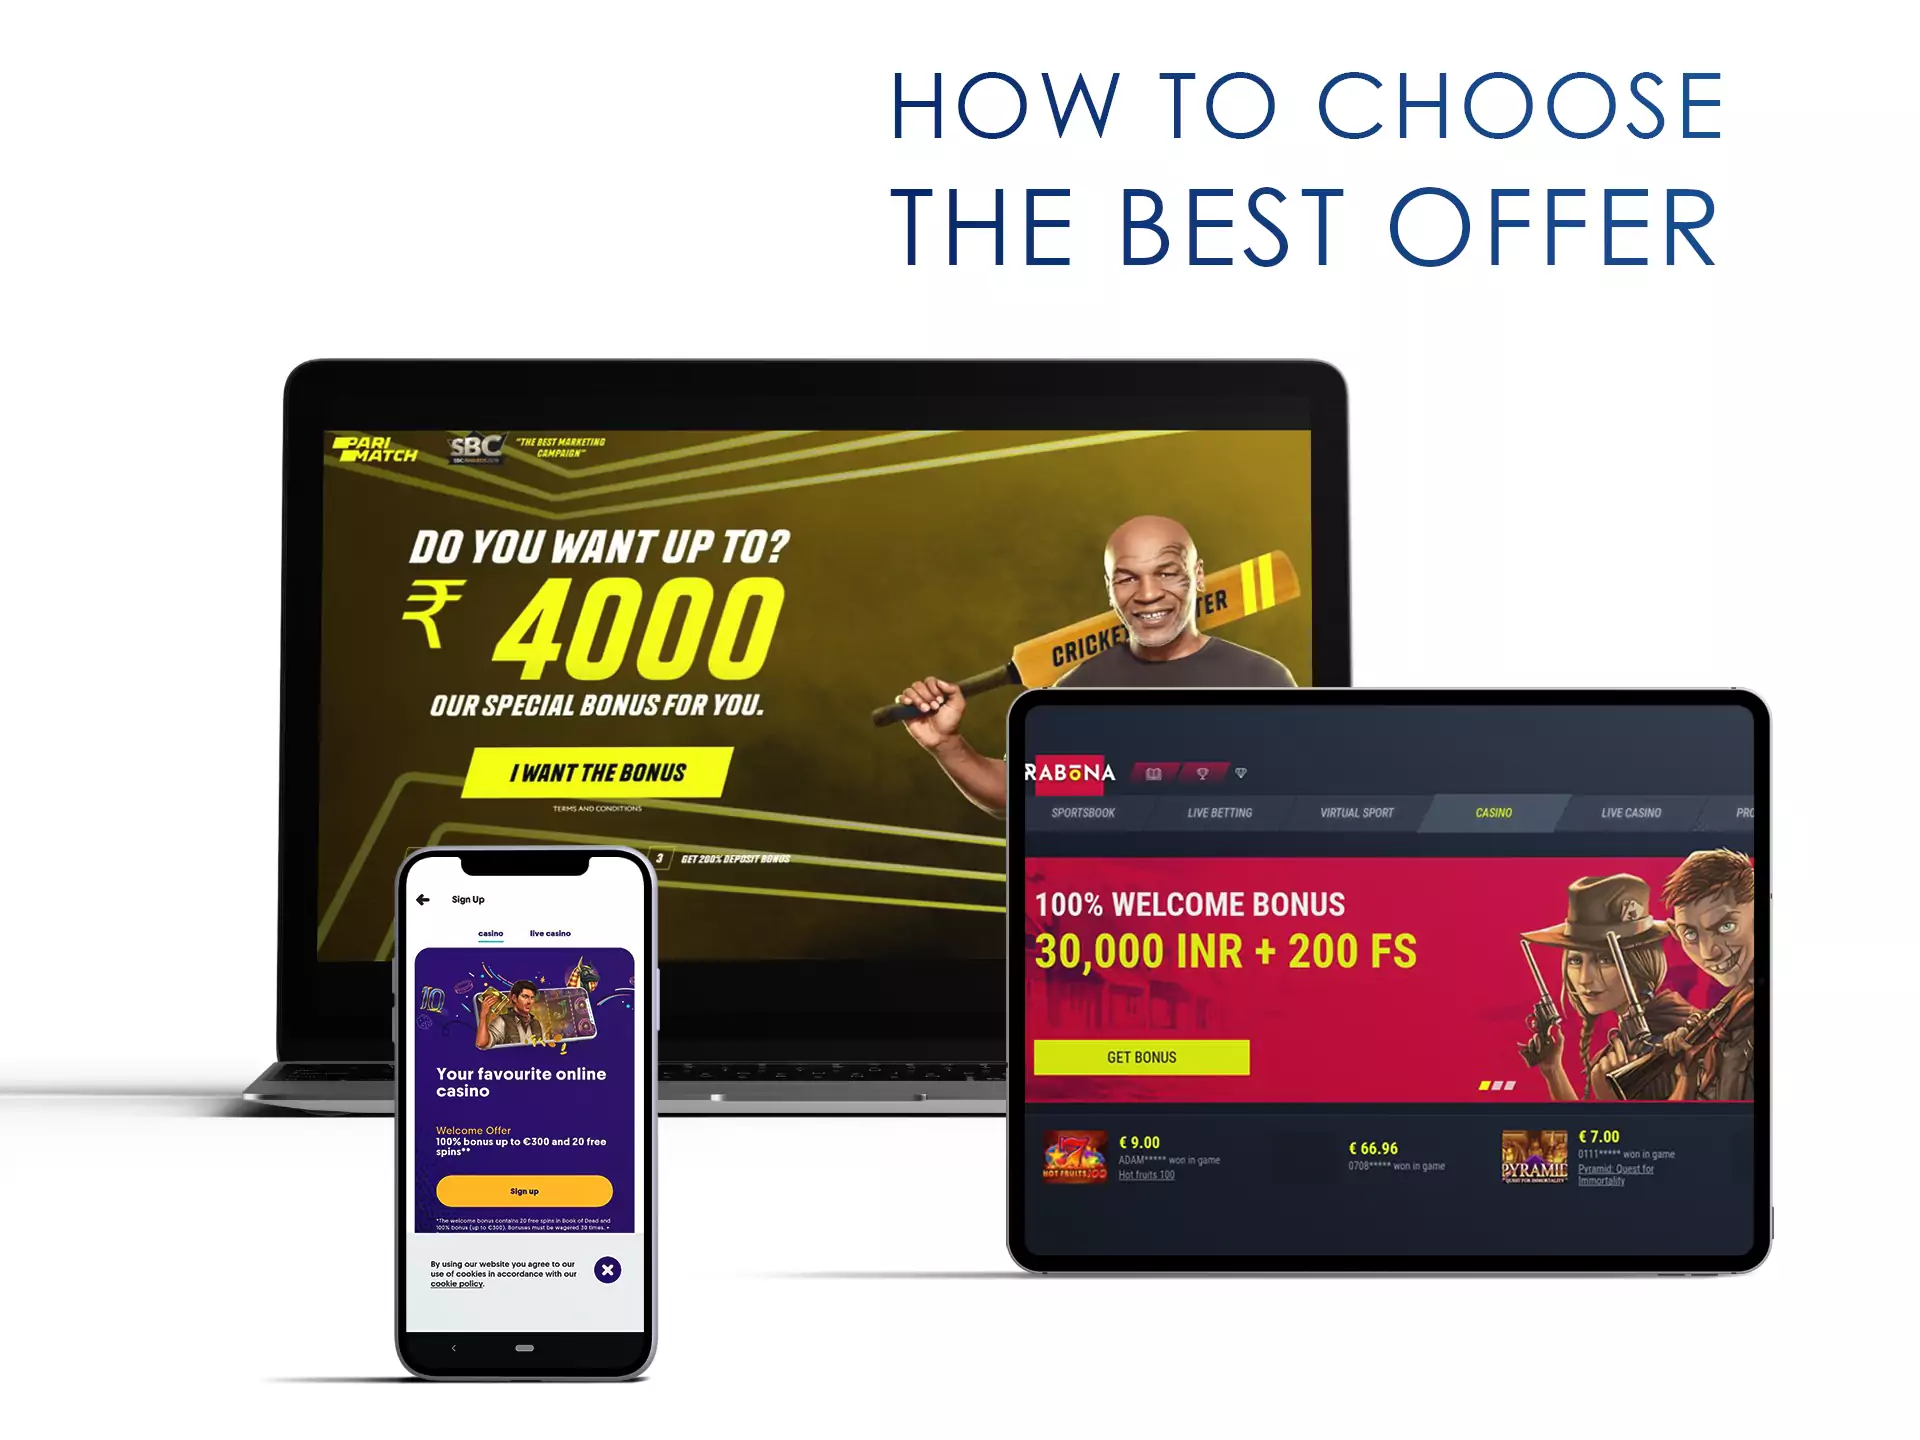 Look through our list of bookmakers with no deposit offers and choose the best one.